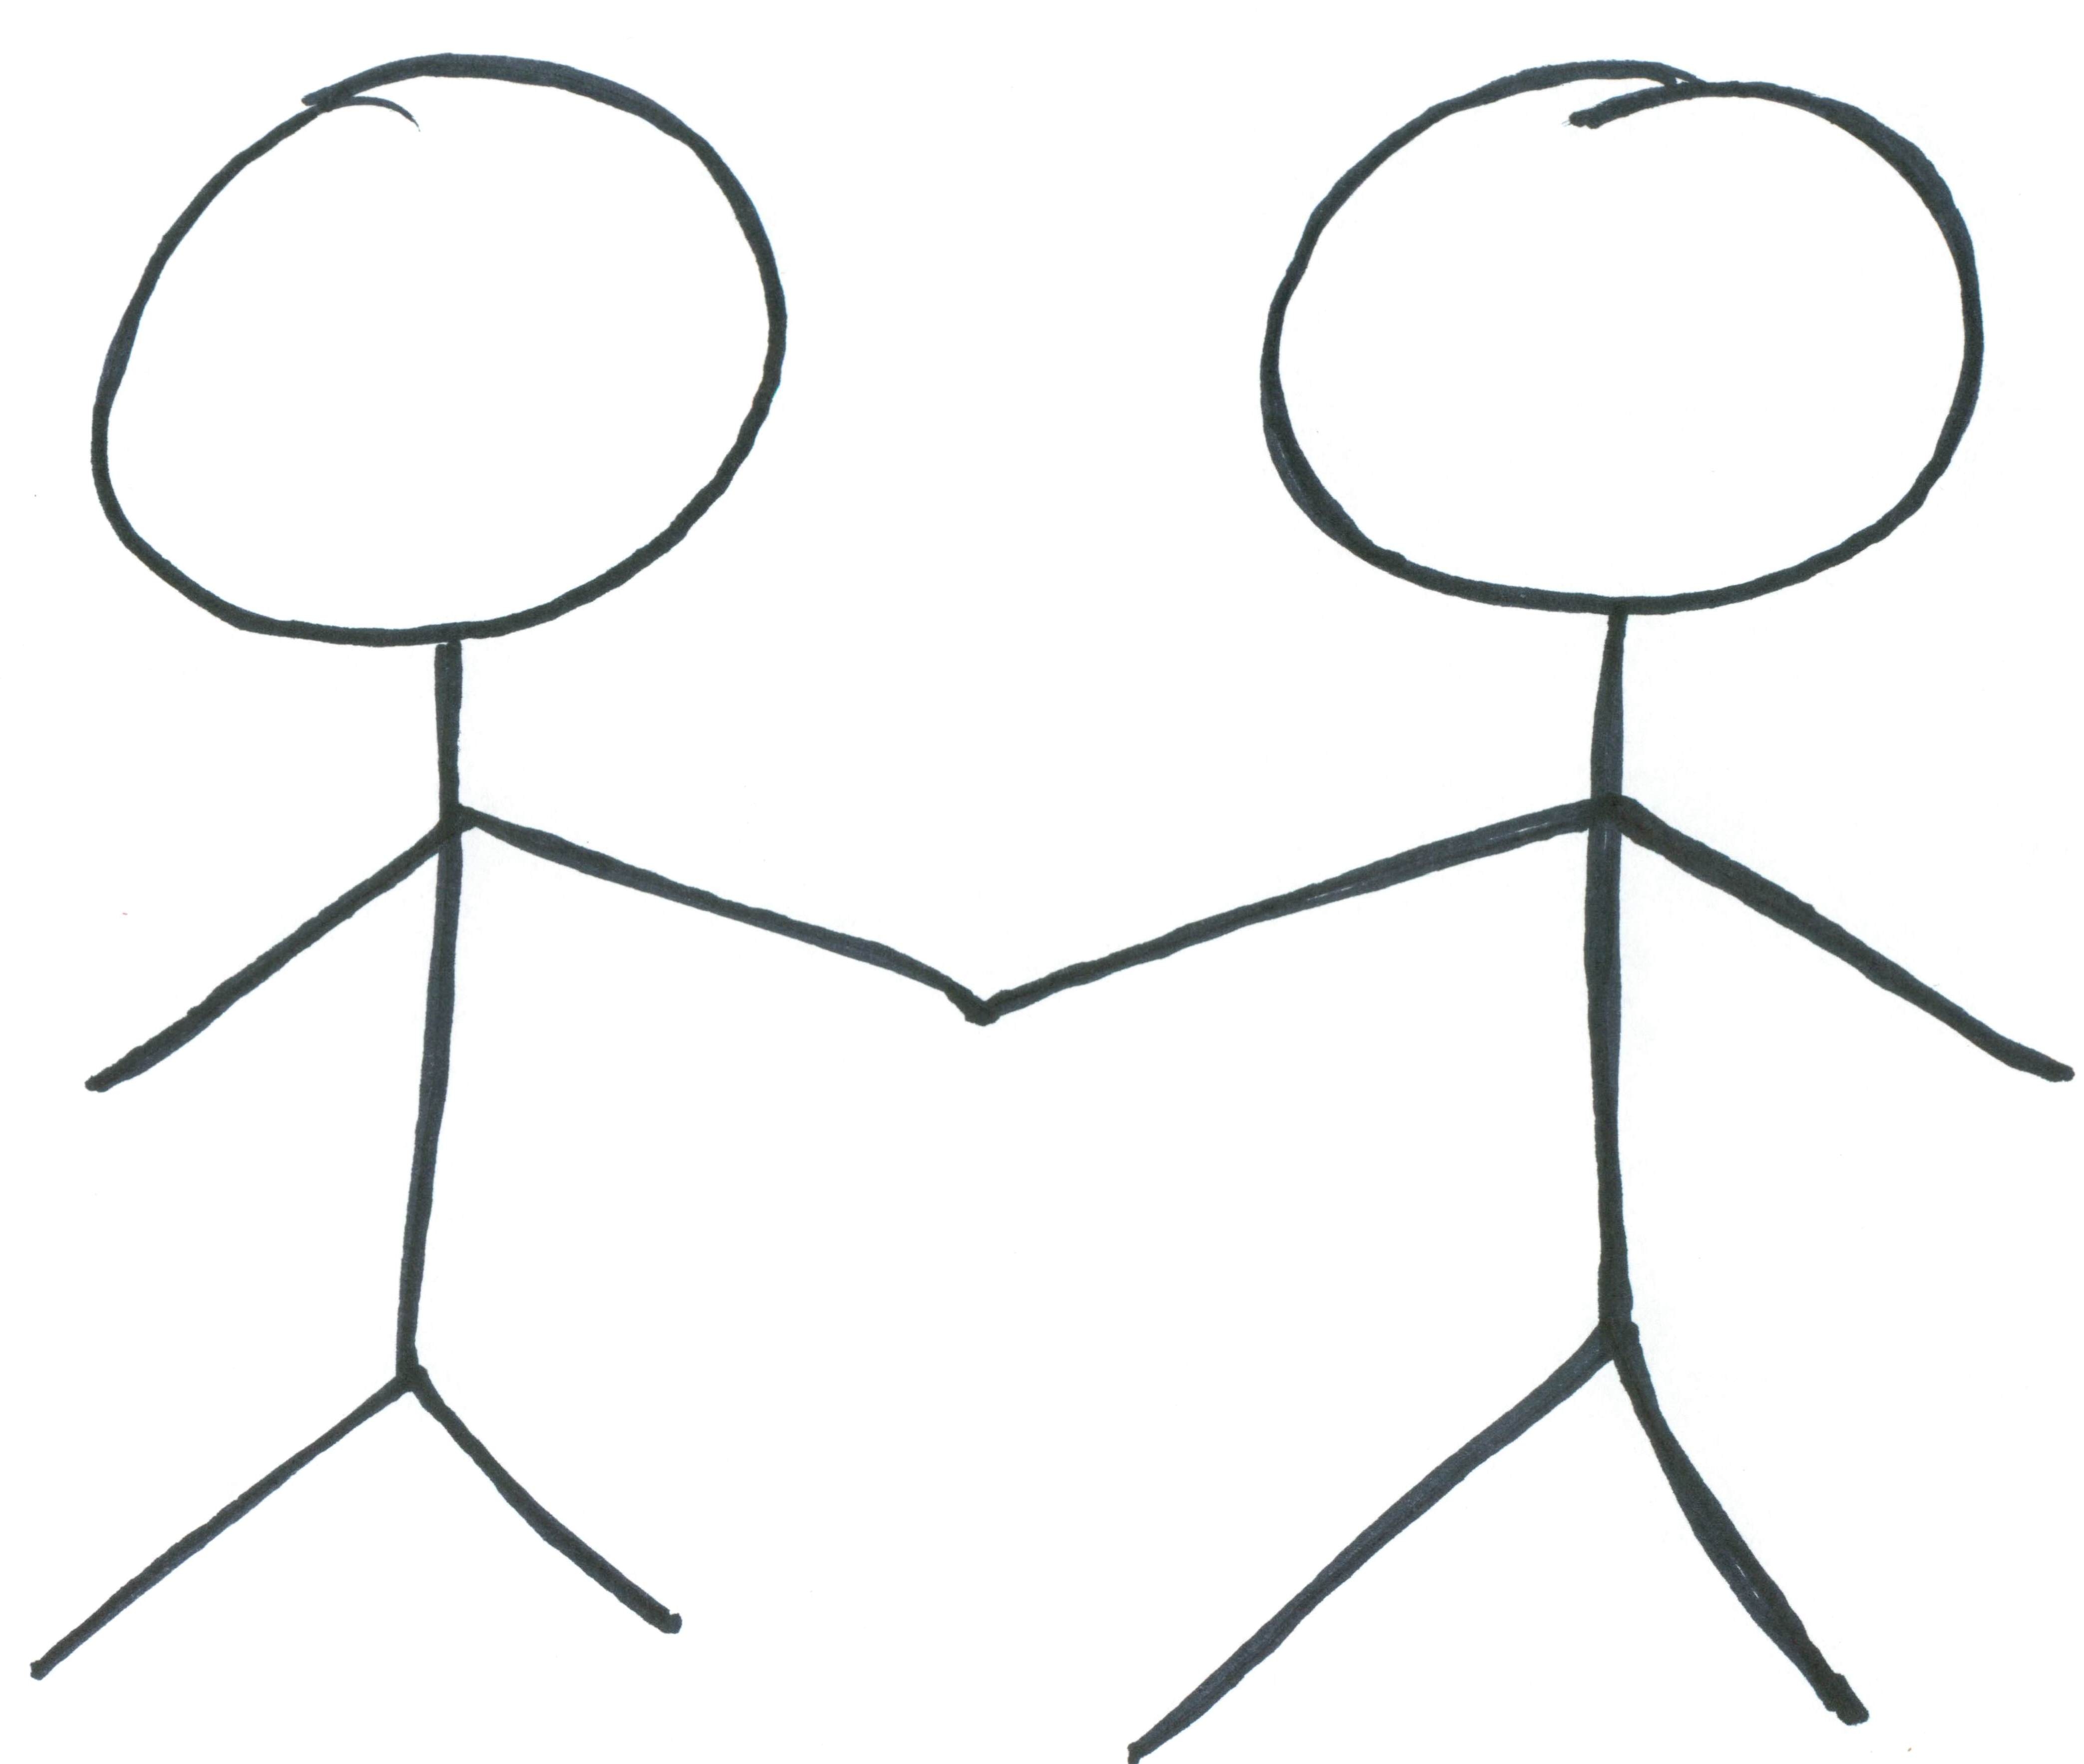 Free download stick people group holding hands clipart - ClipartFox